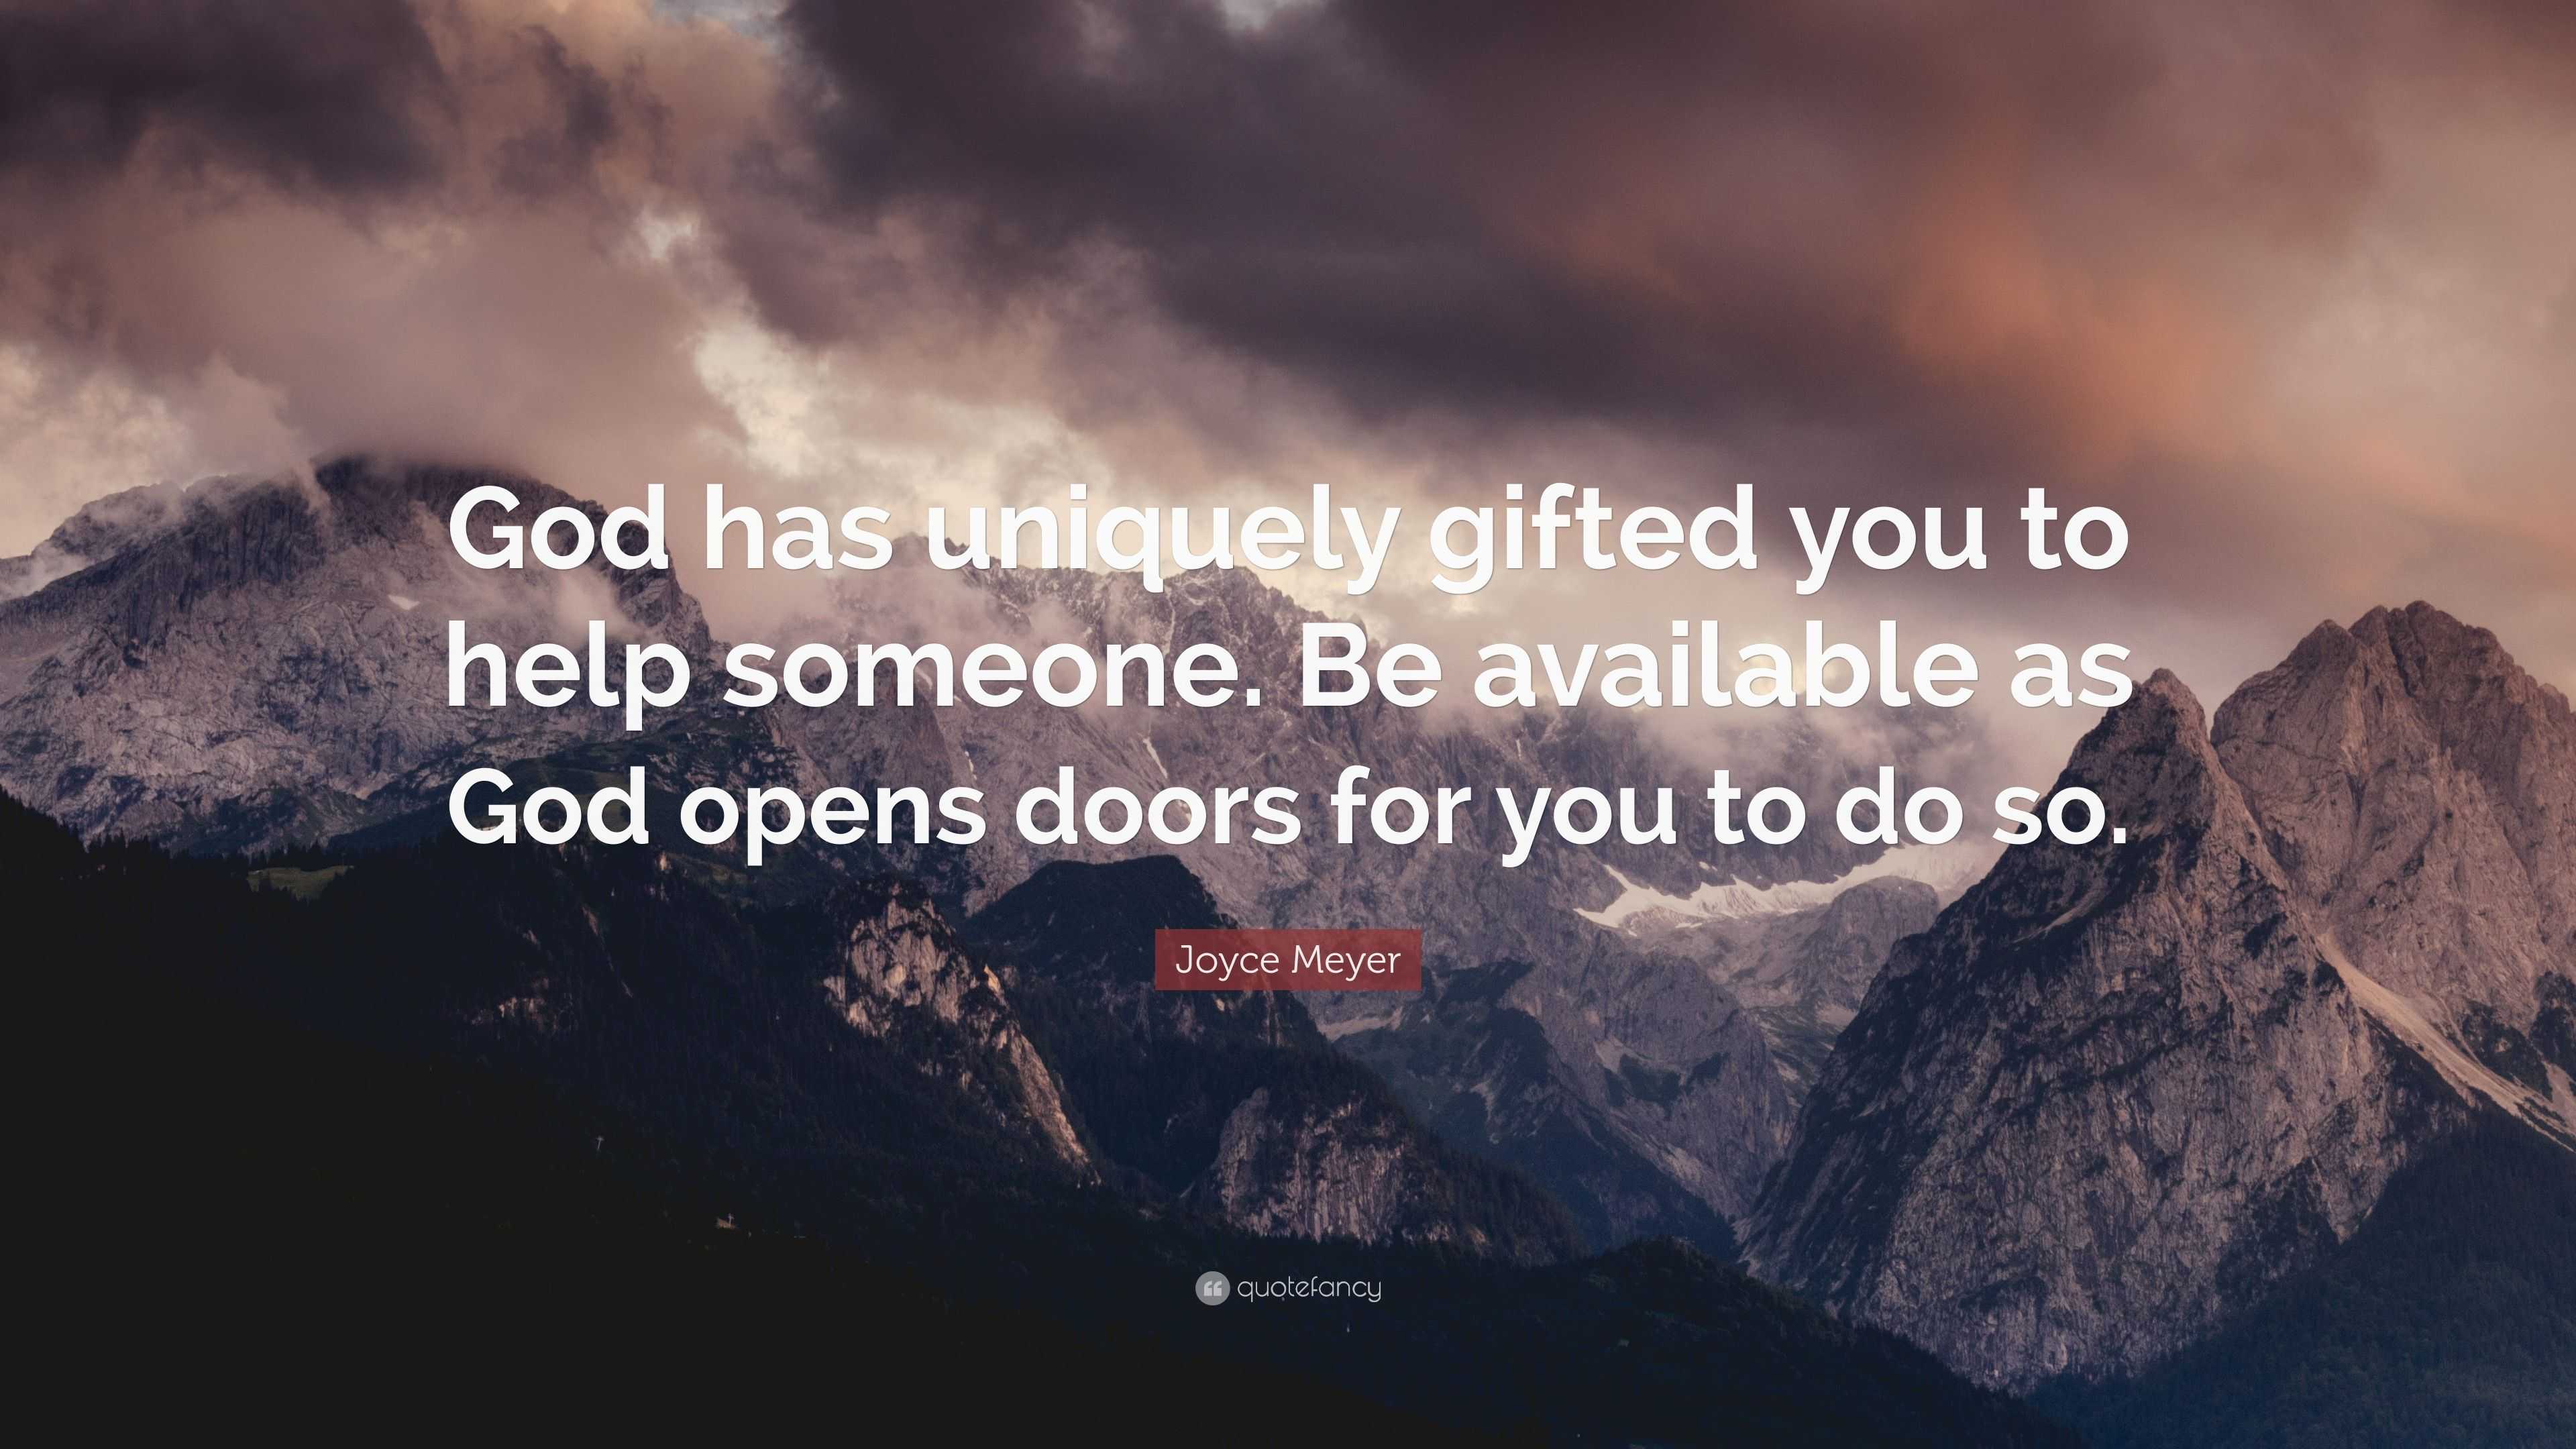 Joyce Meyer Quote: “God has uniquely gifted you to help someone. Be ...